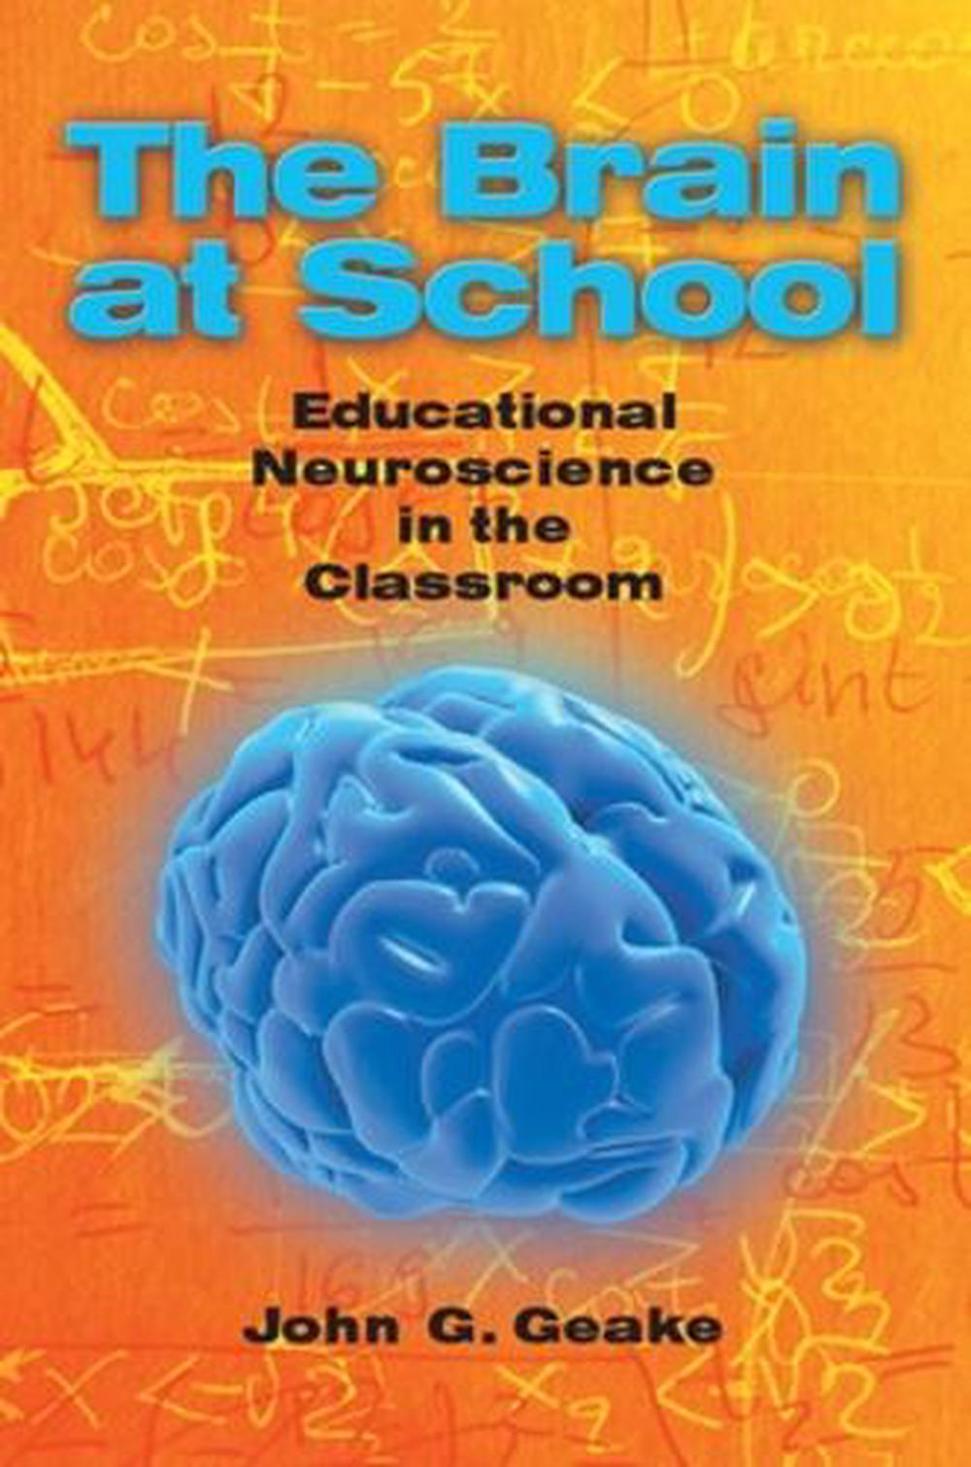 How Can We Use Neuroscience to Create More Engaging and Effective Learning Environments?